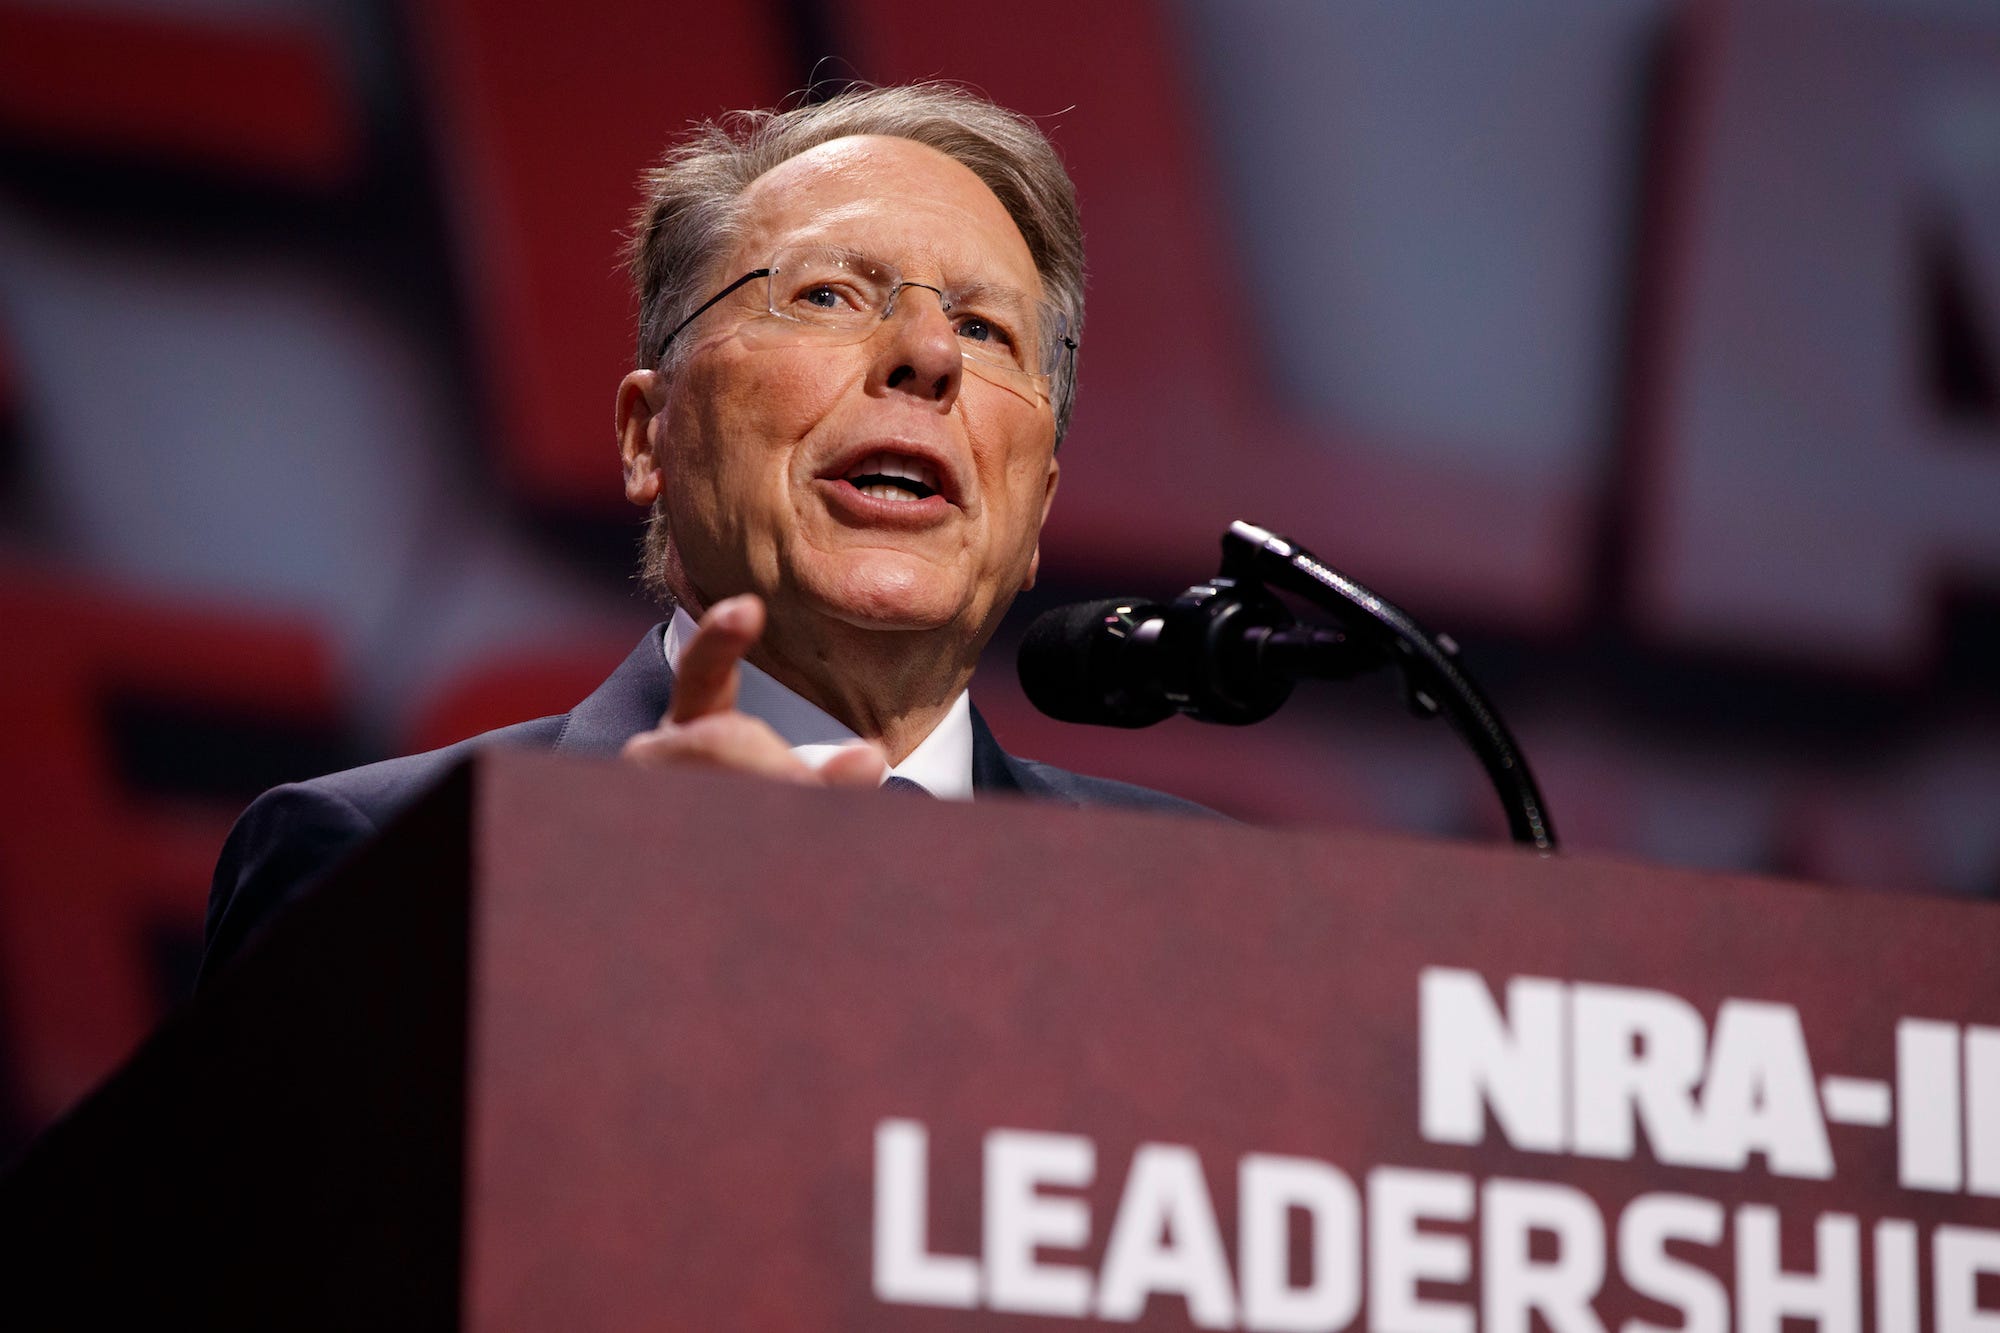 nra throws gun advocate wayne lapierre under the bus in ny corruption trial, calling his abrupt resignation a 'course correction'